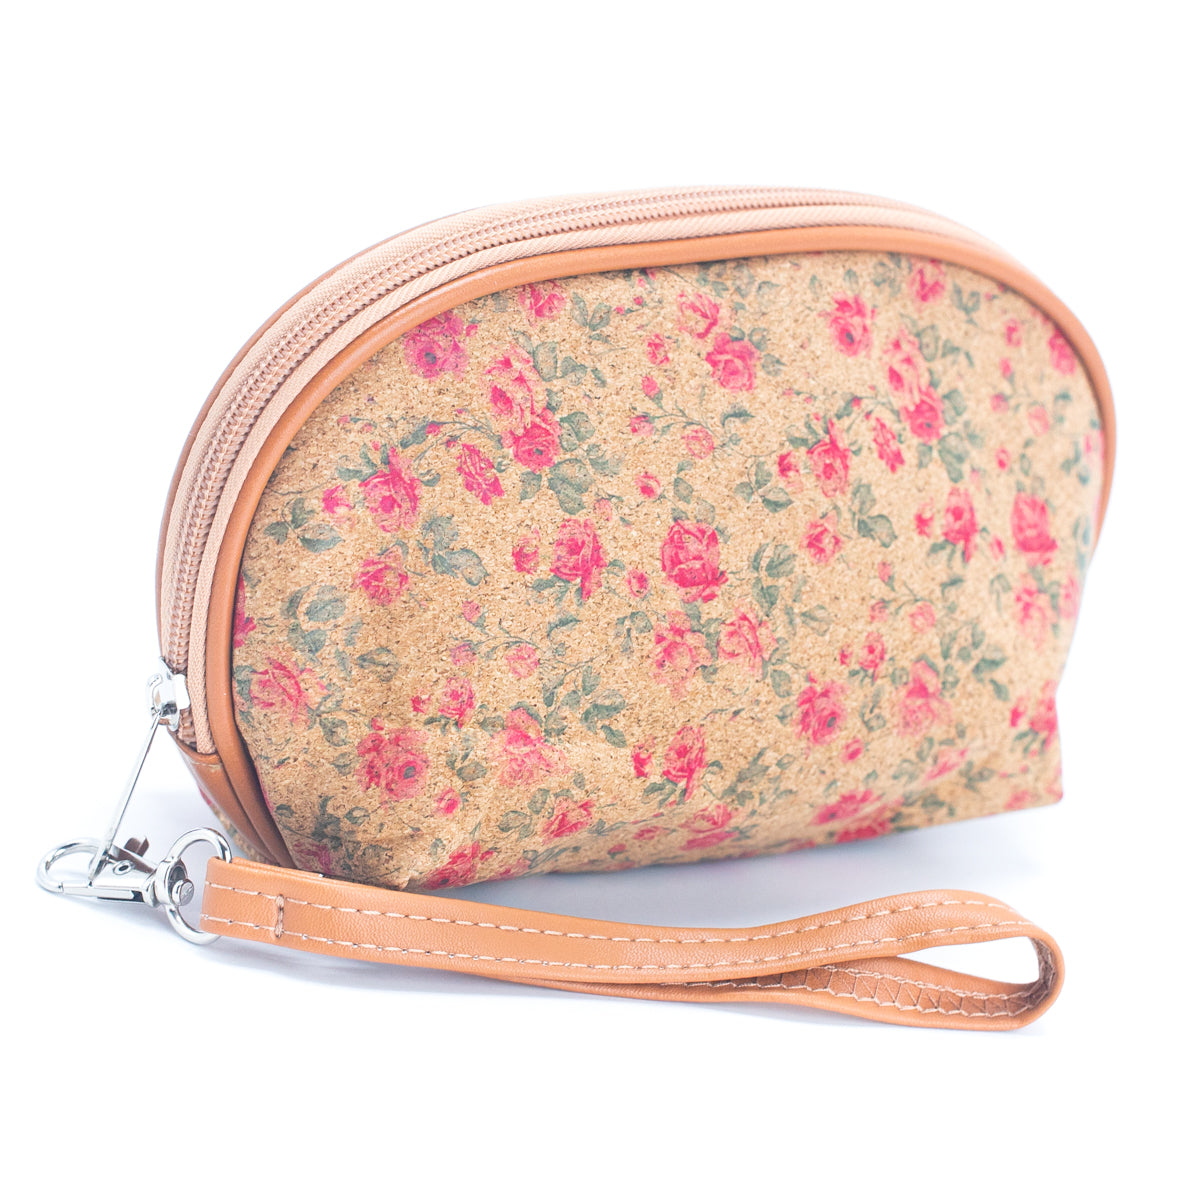 Women's Natural Cork Clutch Bag w/ Hand Strap | THE CORK COLLECTION